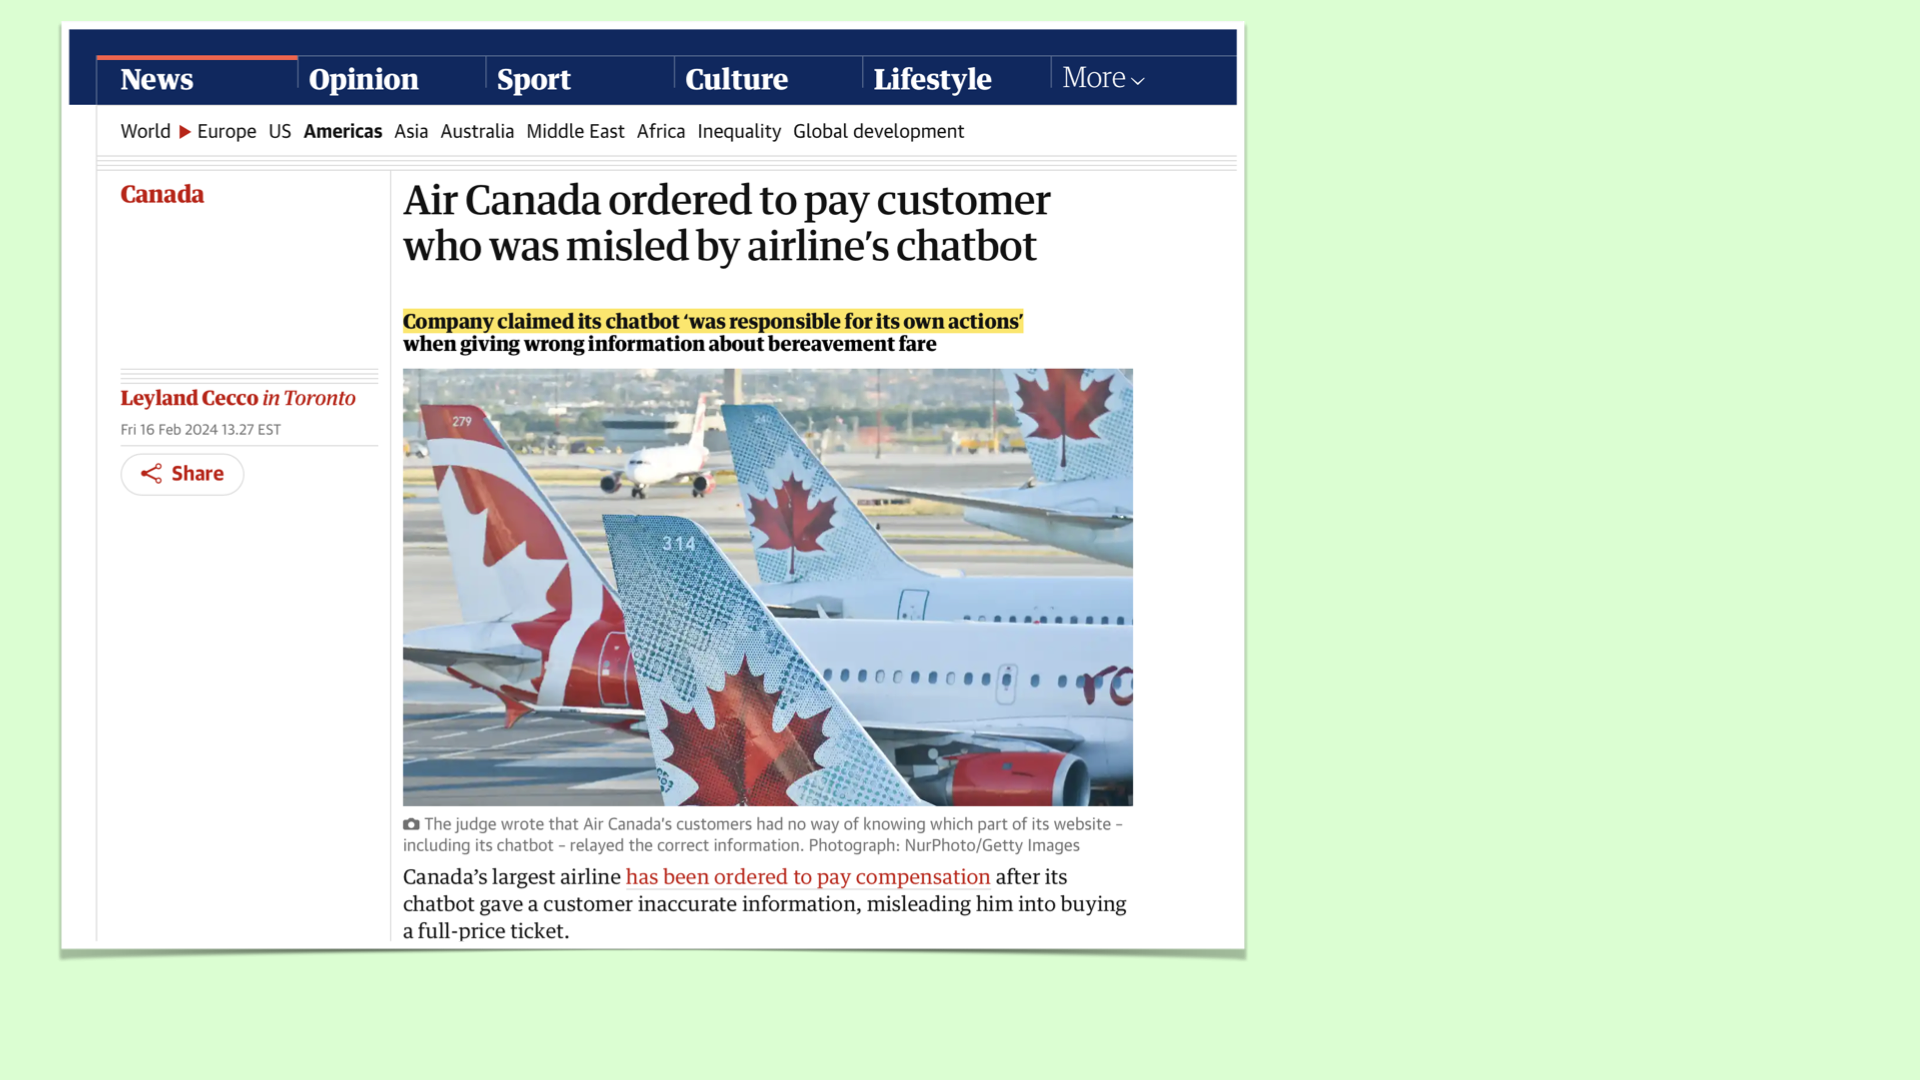 Guardian article headlined "Air Canada ordered to pay customer who was misled by airline's chatbot.